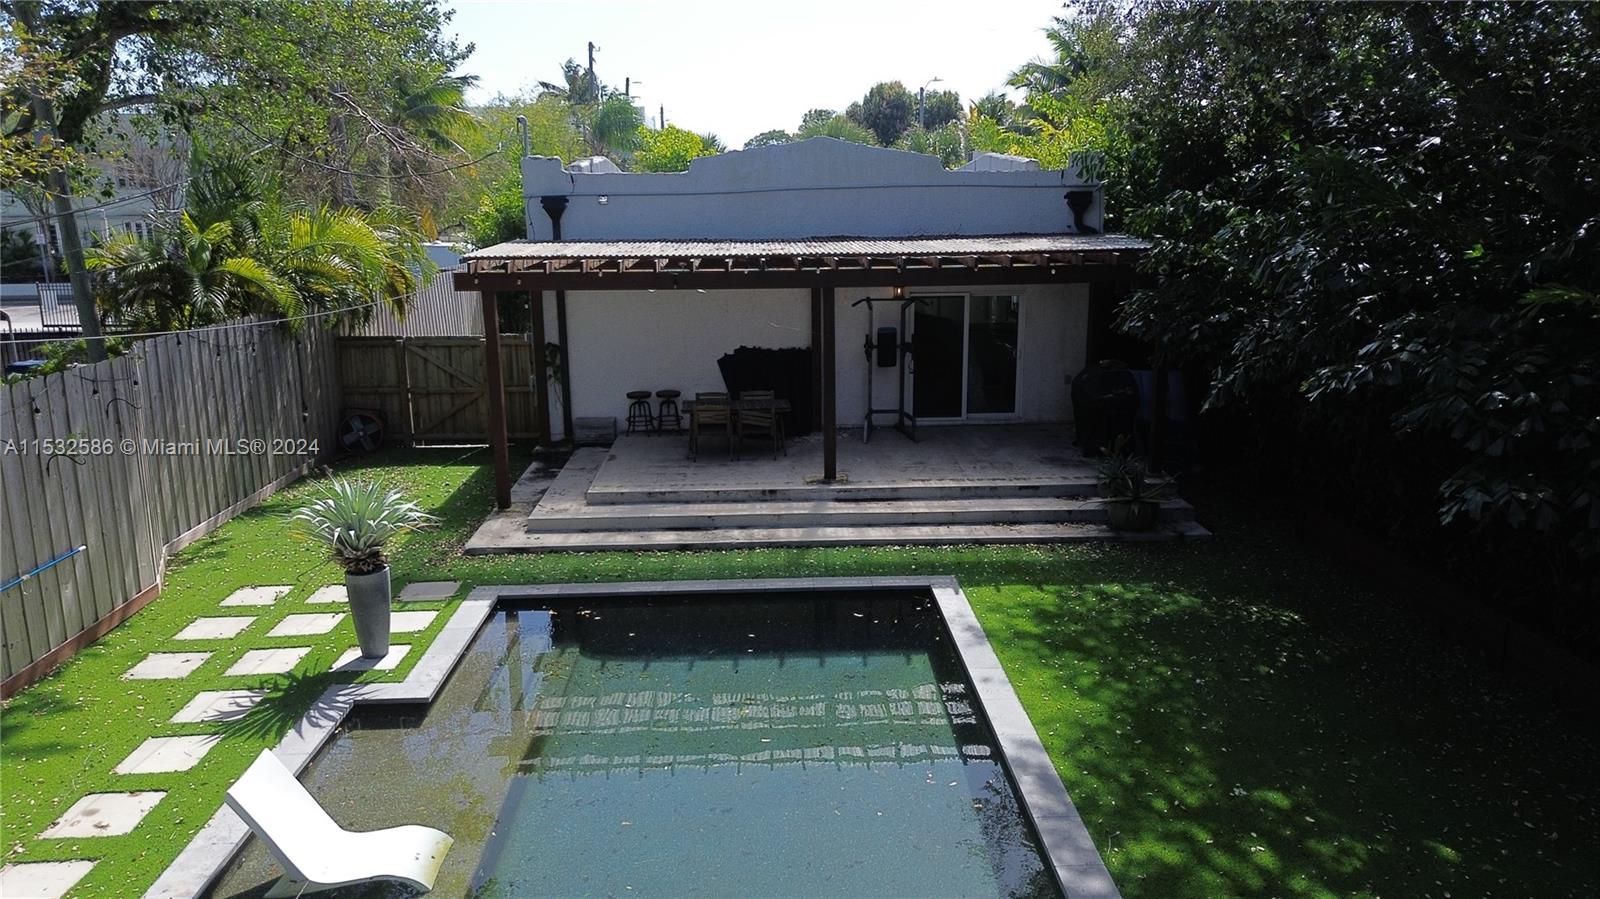 a view of house with backyard and sitting area